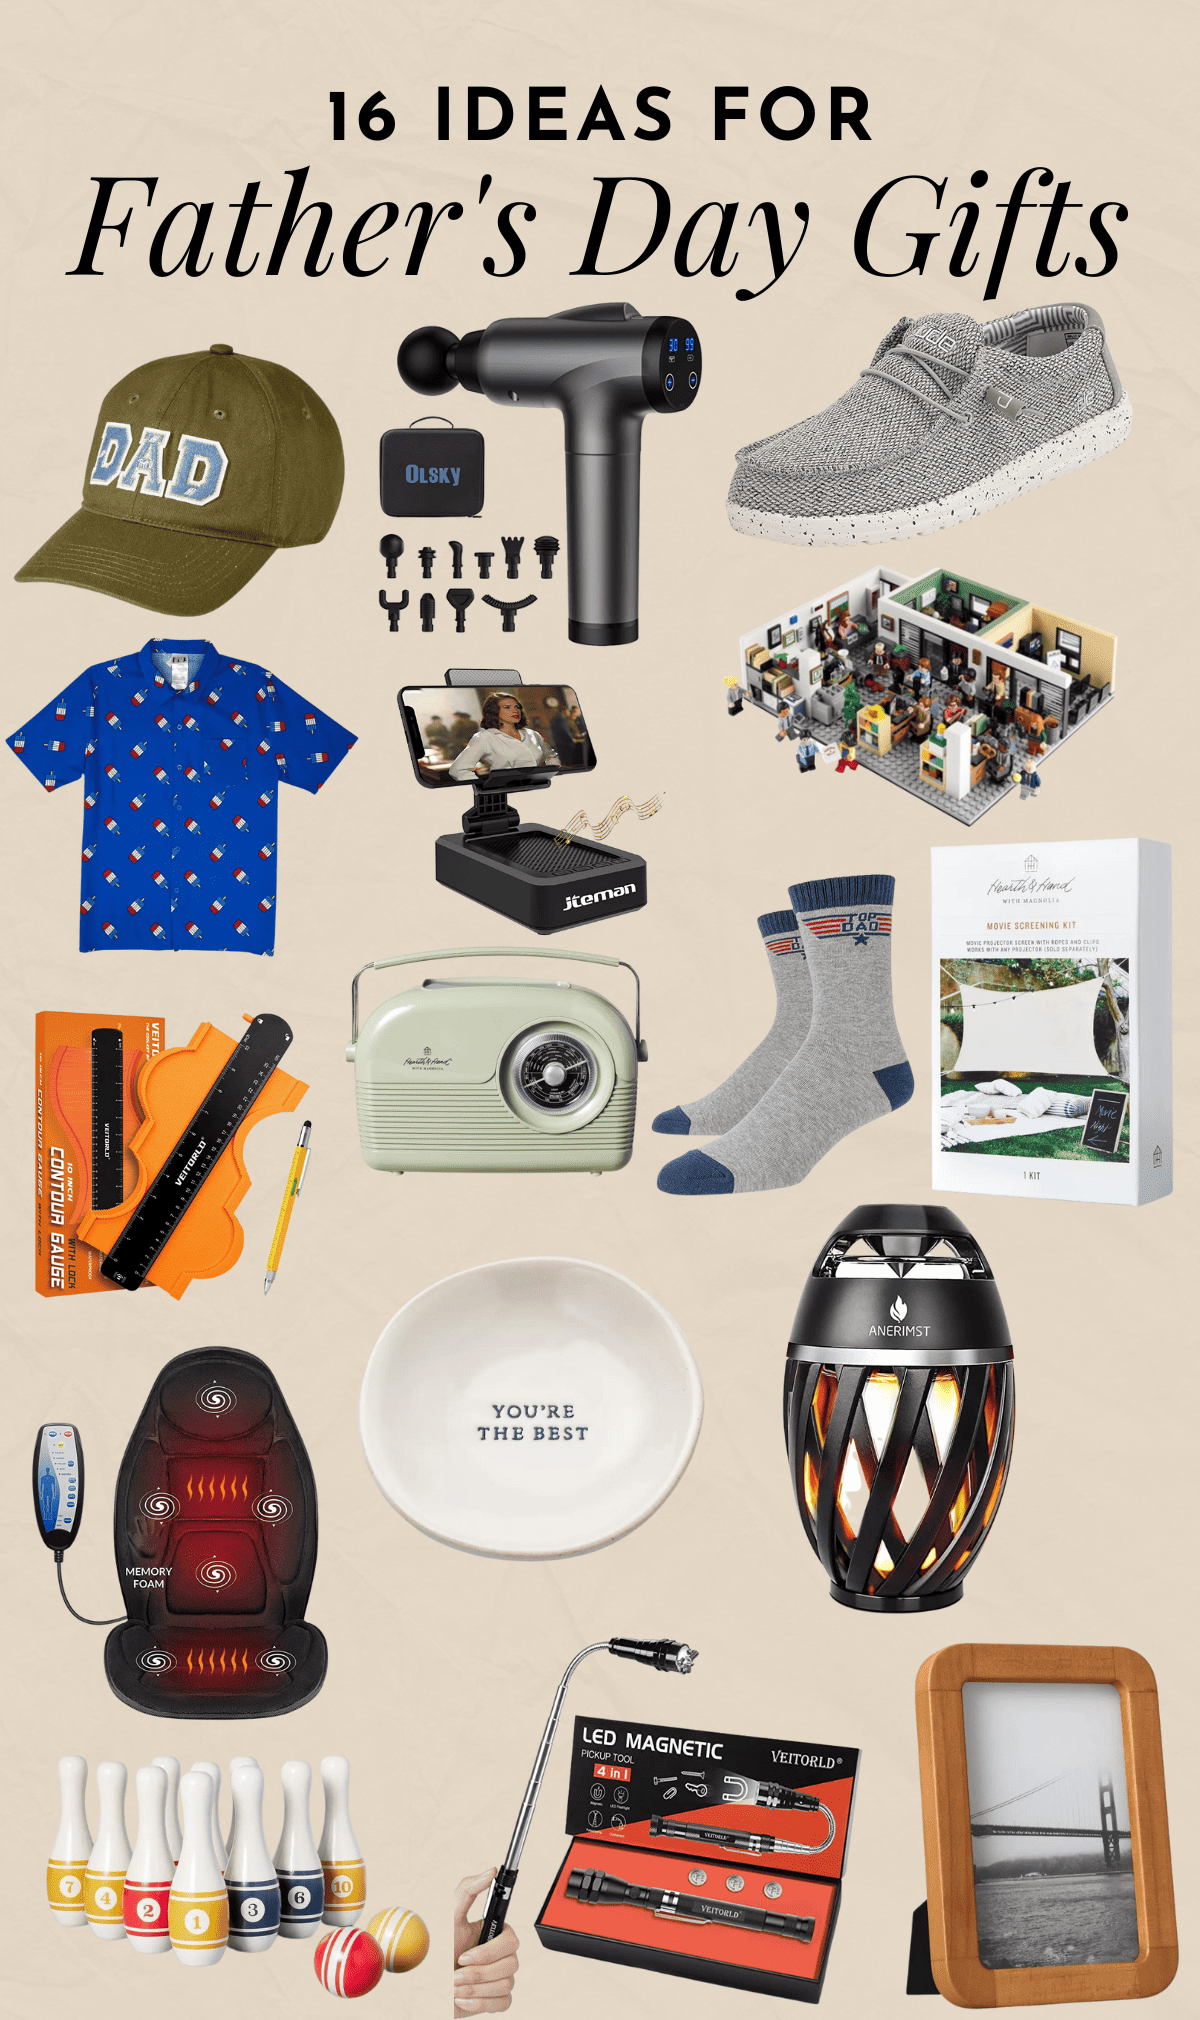 6 Gifts to Spoil Dad with This Father's Day